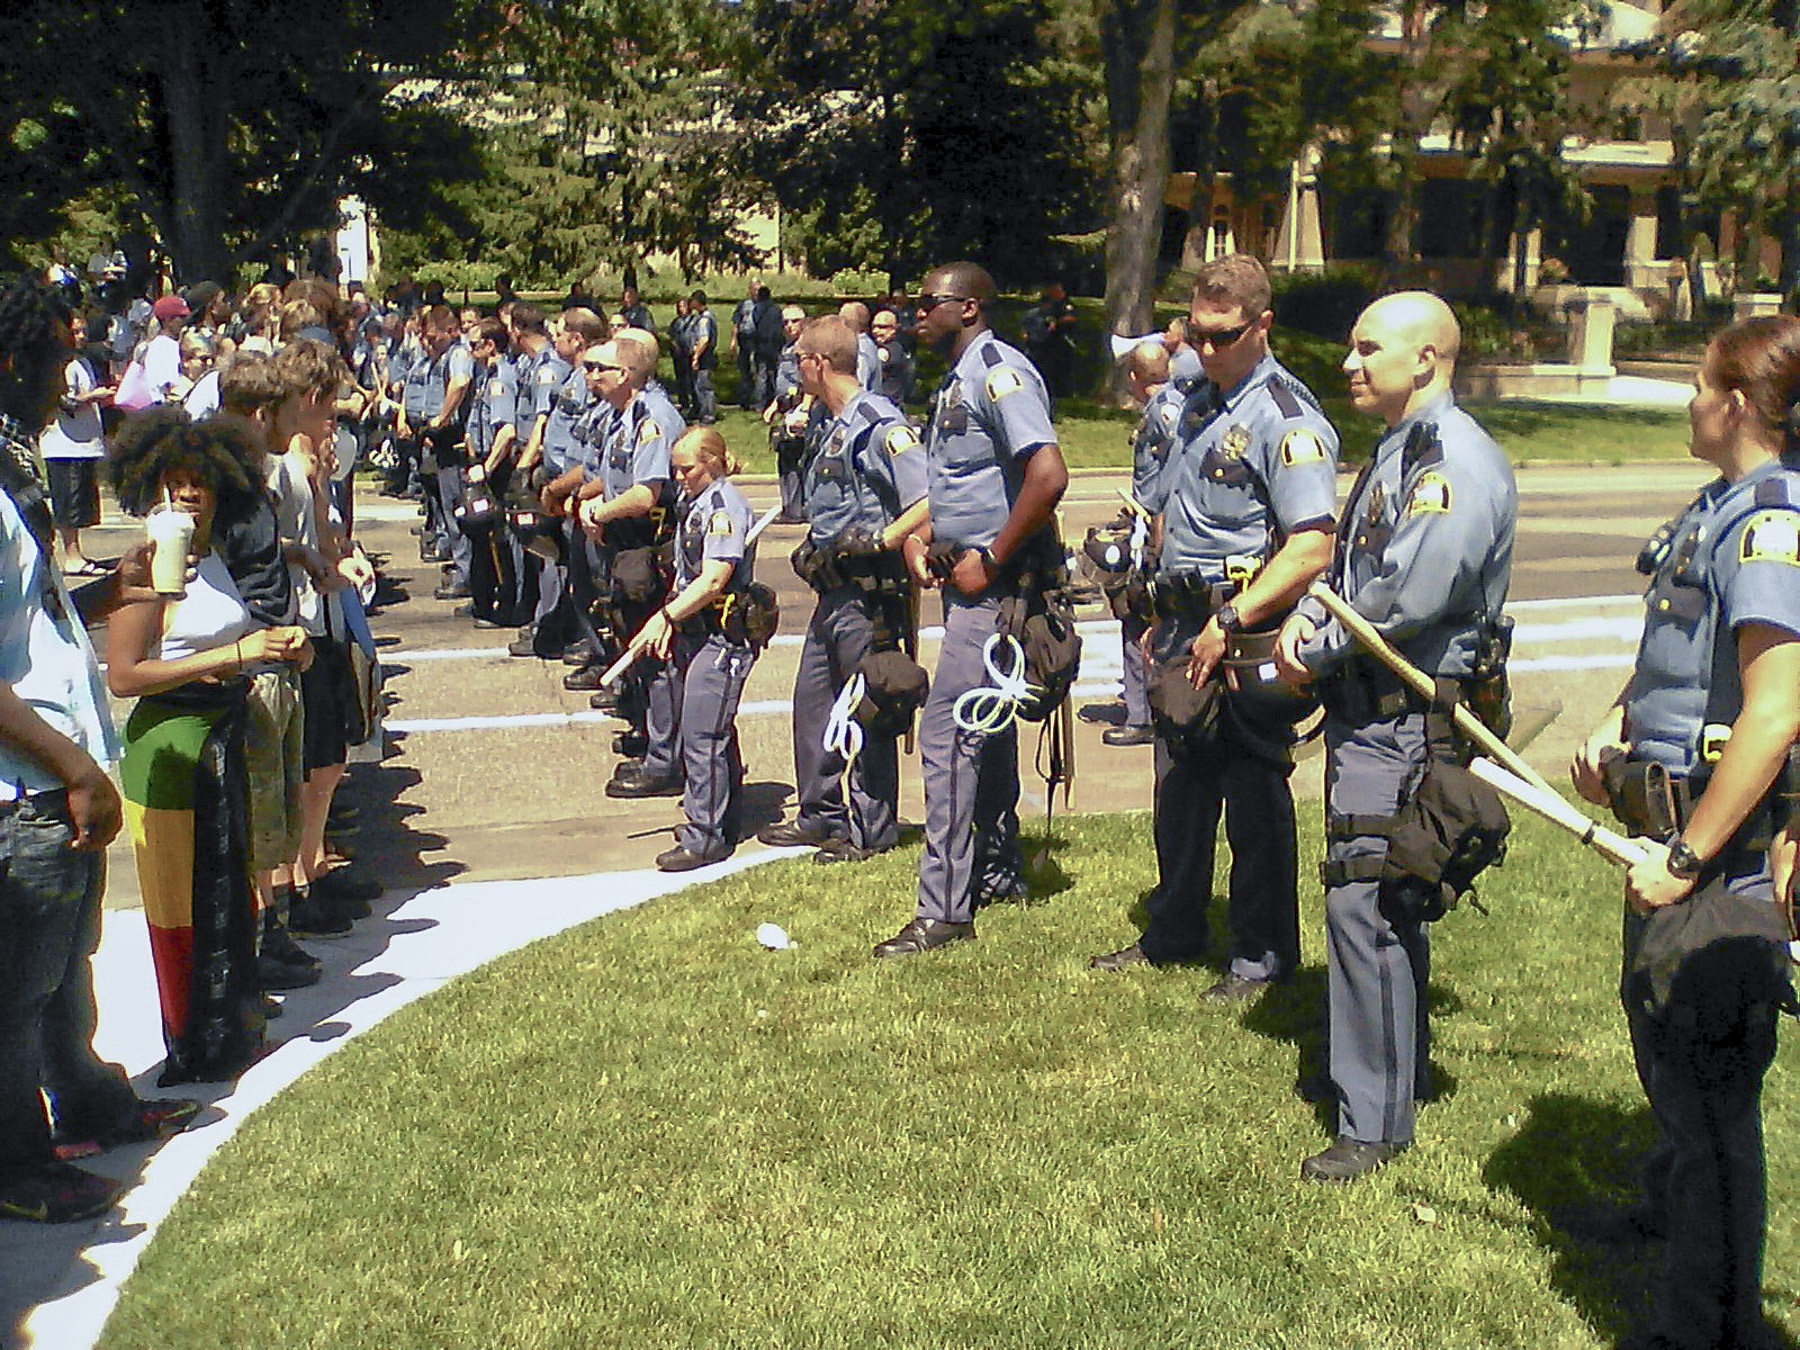 St. Paul police officers face off with a crowd near the Minnesota Governor's Residence. House Photography file photo